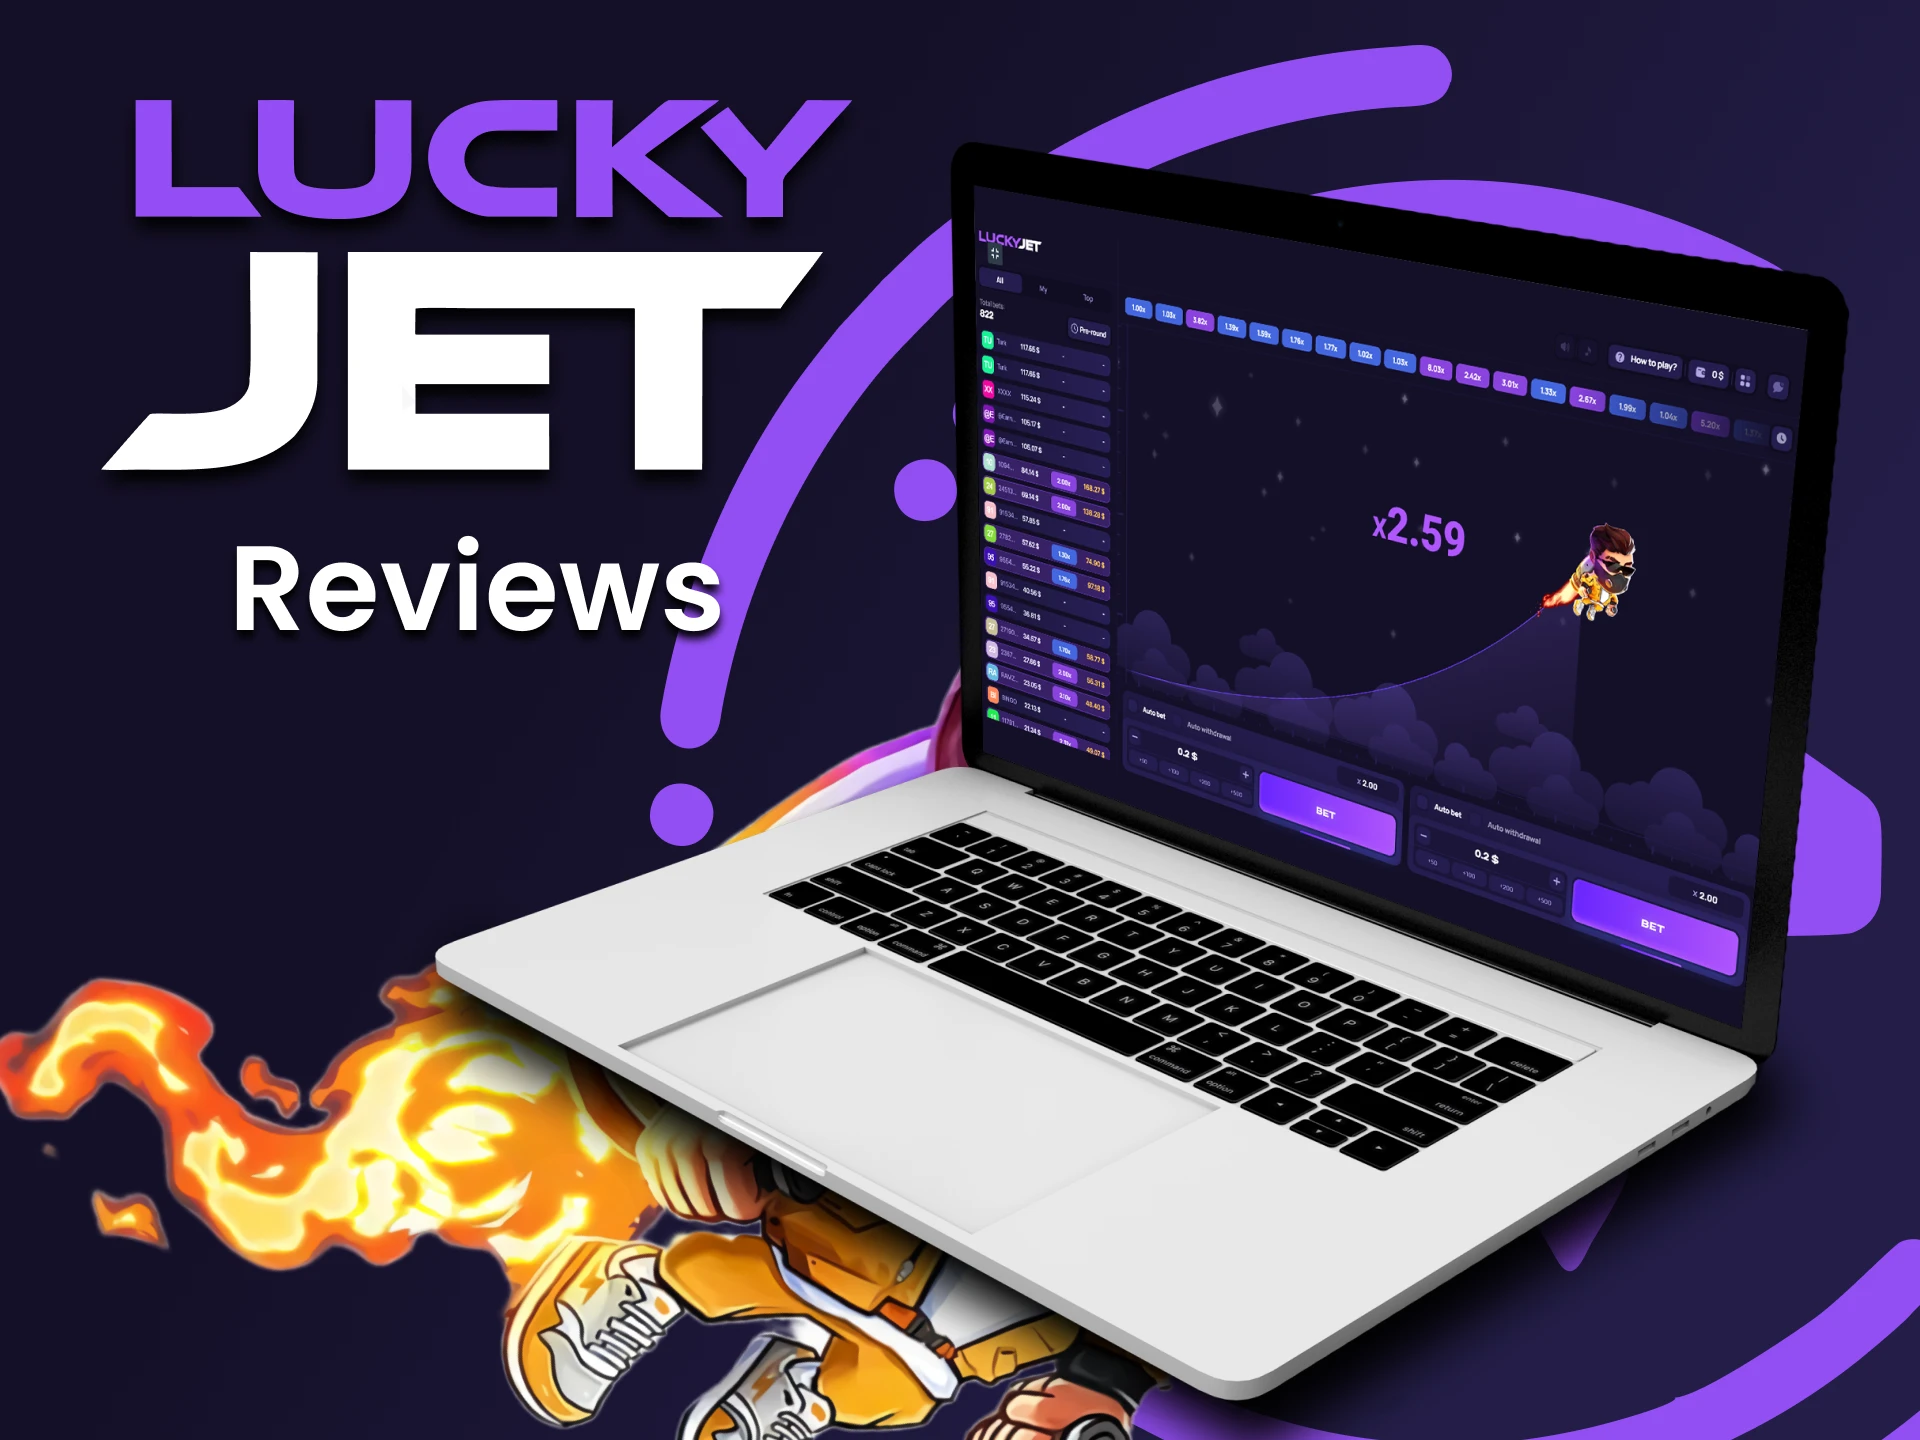 The game Lucky Jet has a very fun process.